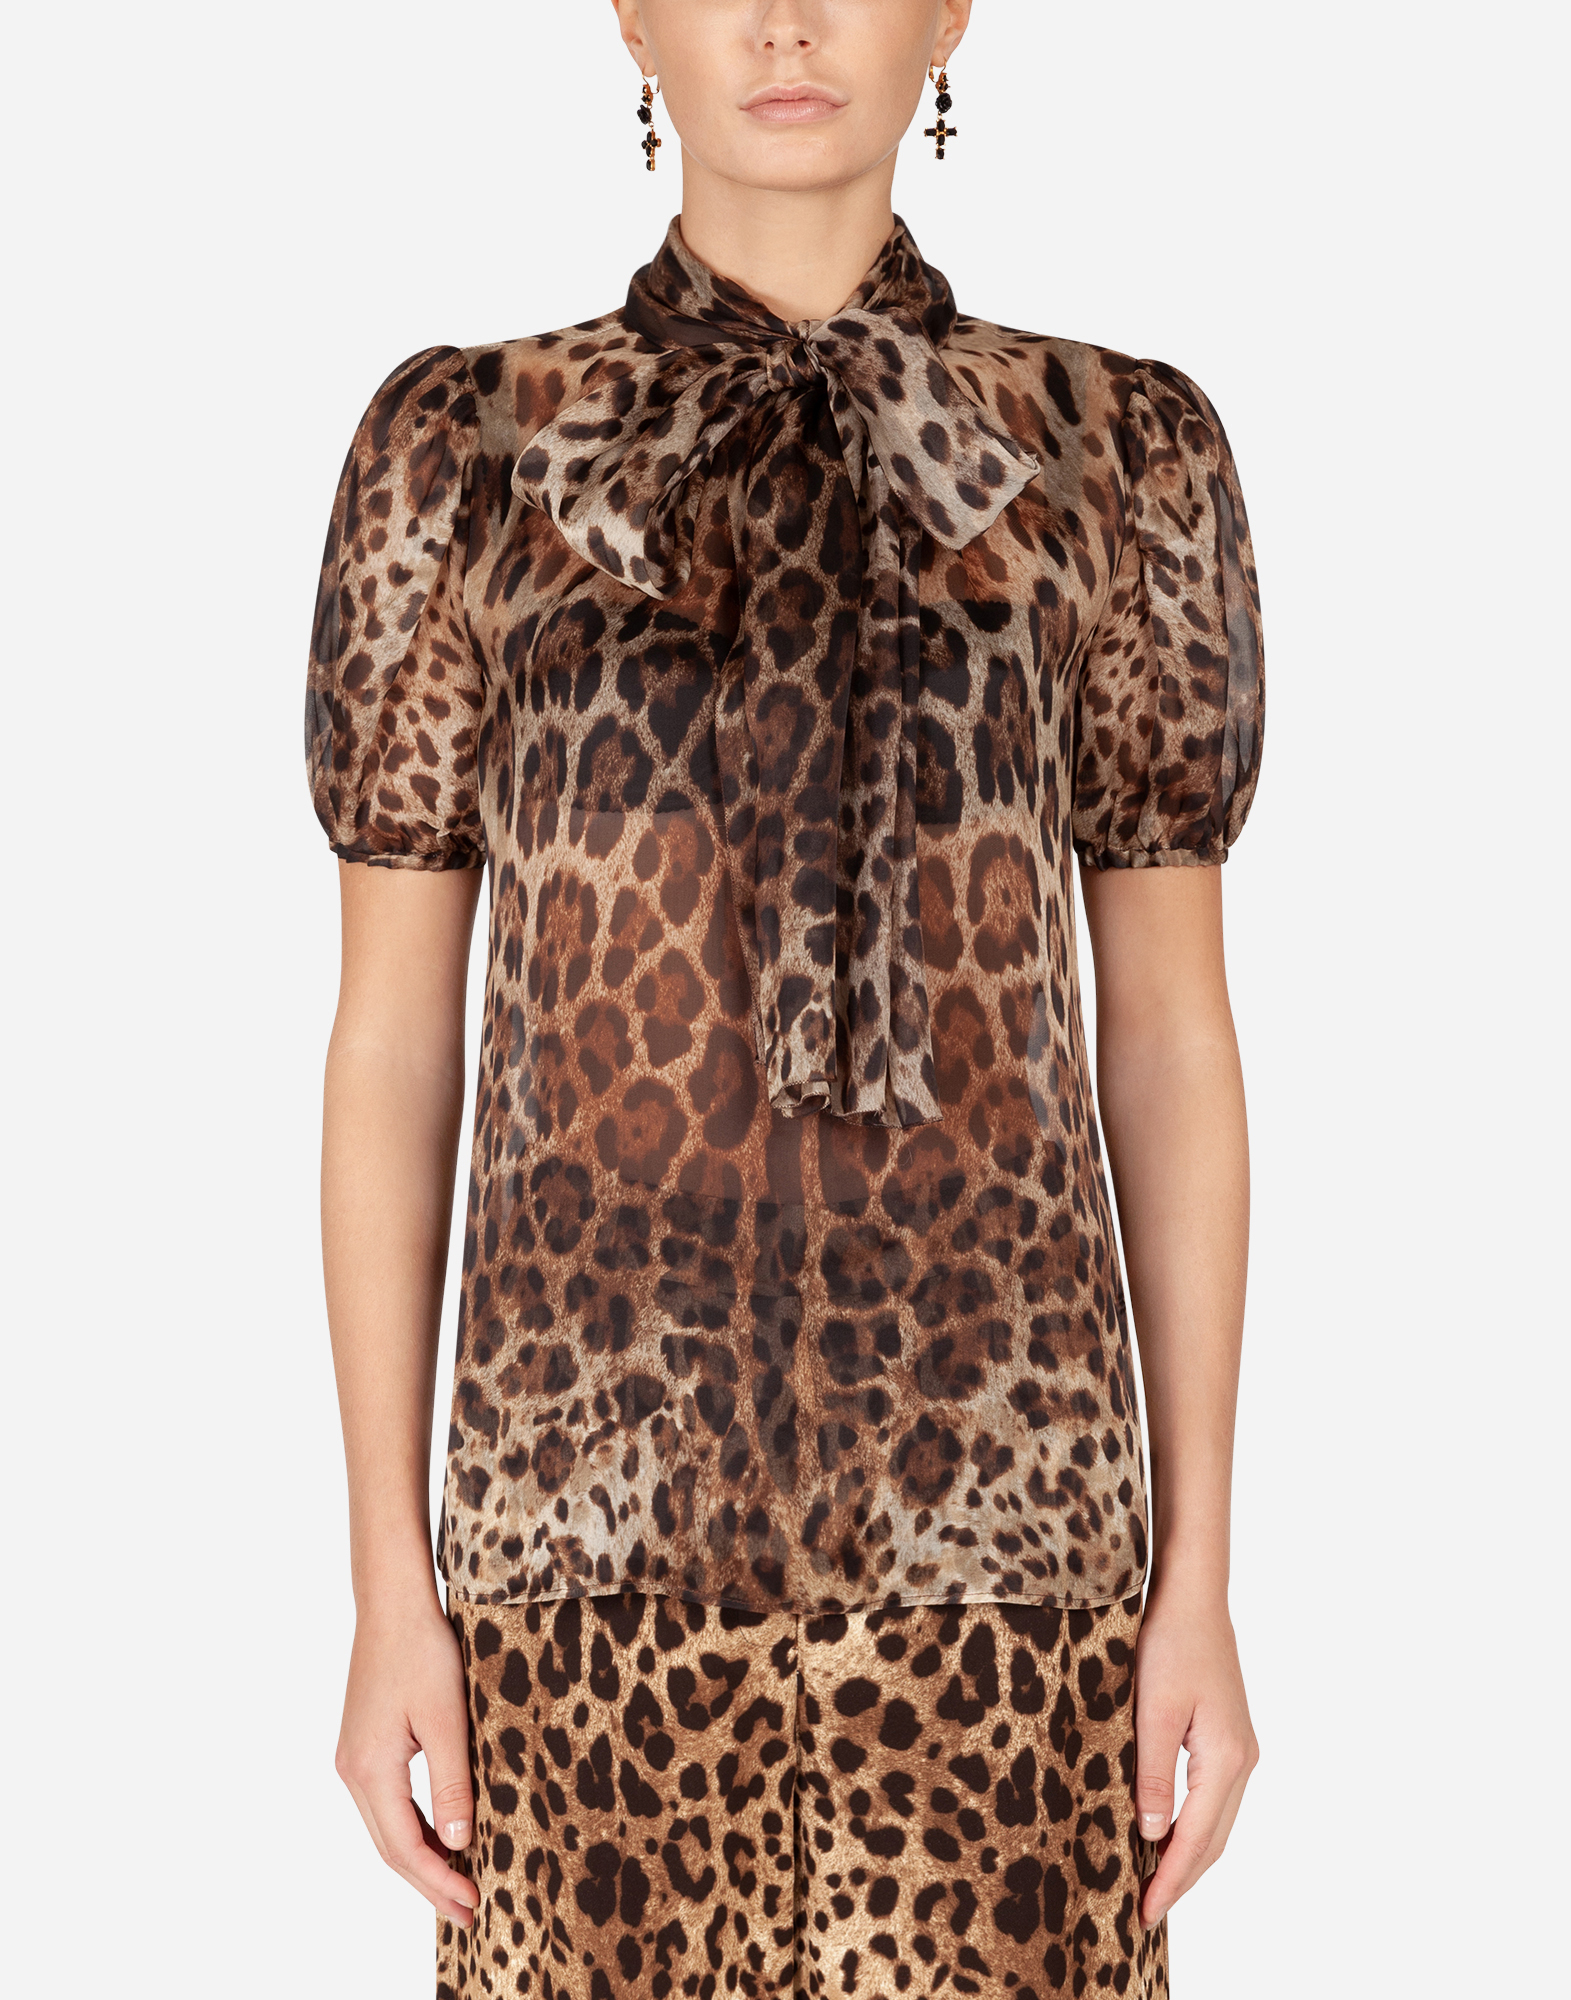 DOLCE & GABBANA LEOPARD-PRINT ORGANZA BLOUSE WITH PUSSY BOW